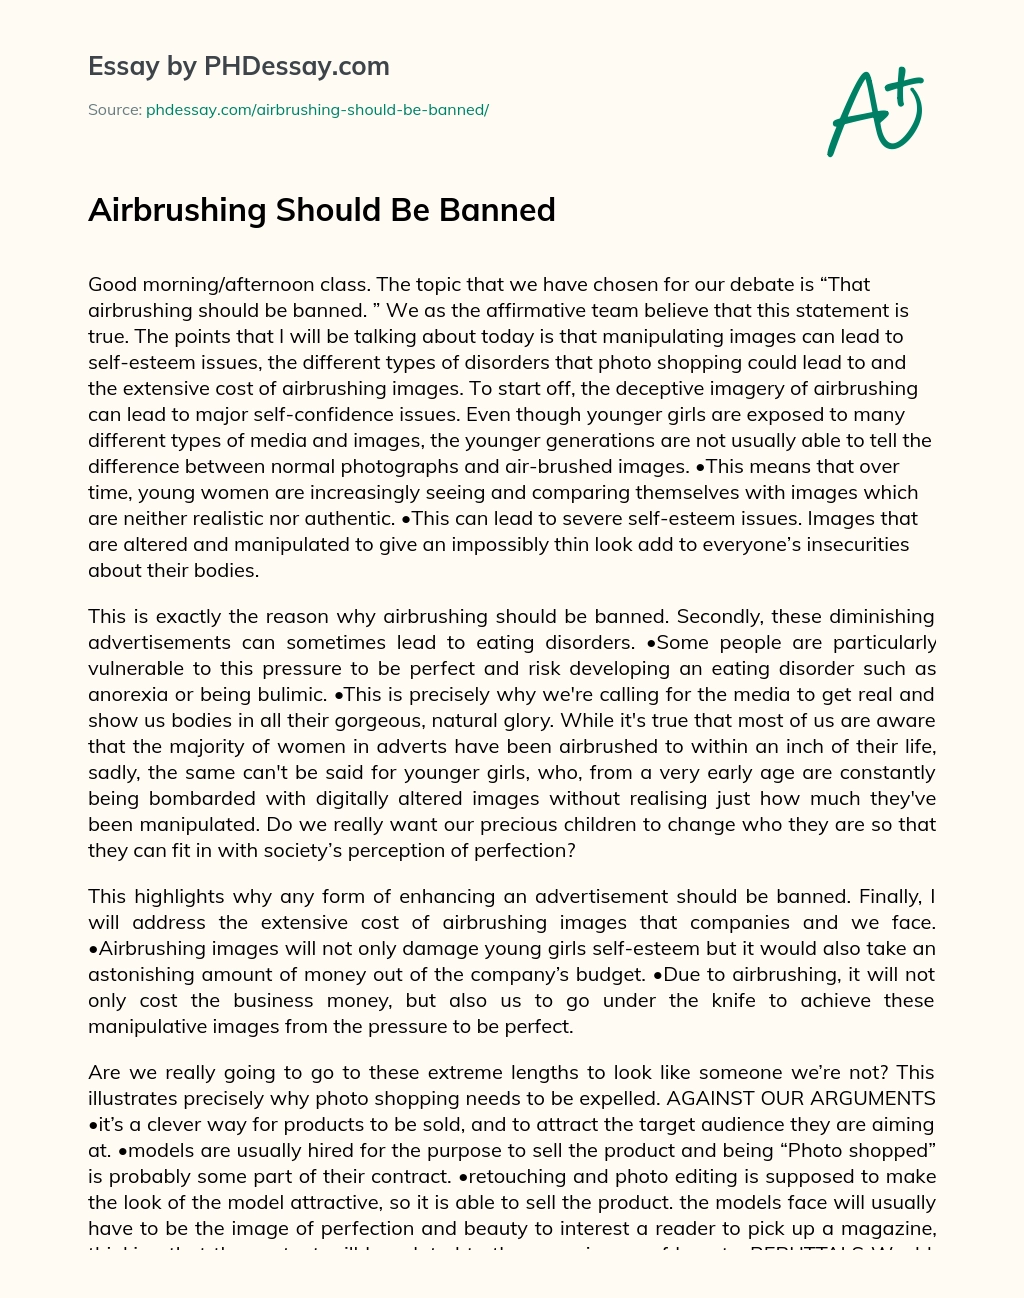 Airbrushing Should Be Banned essay